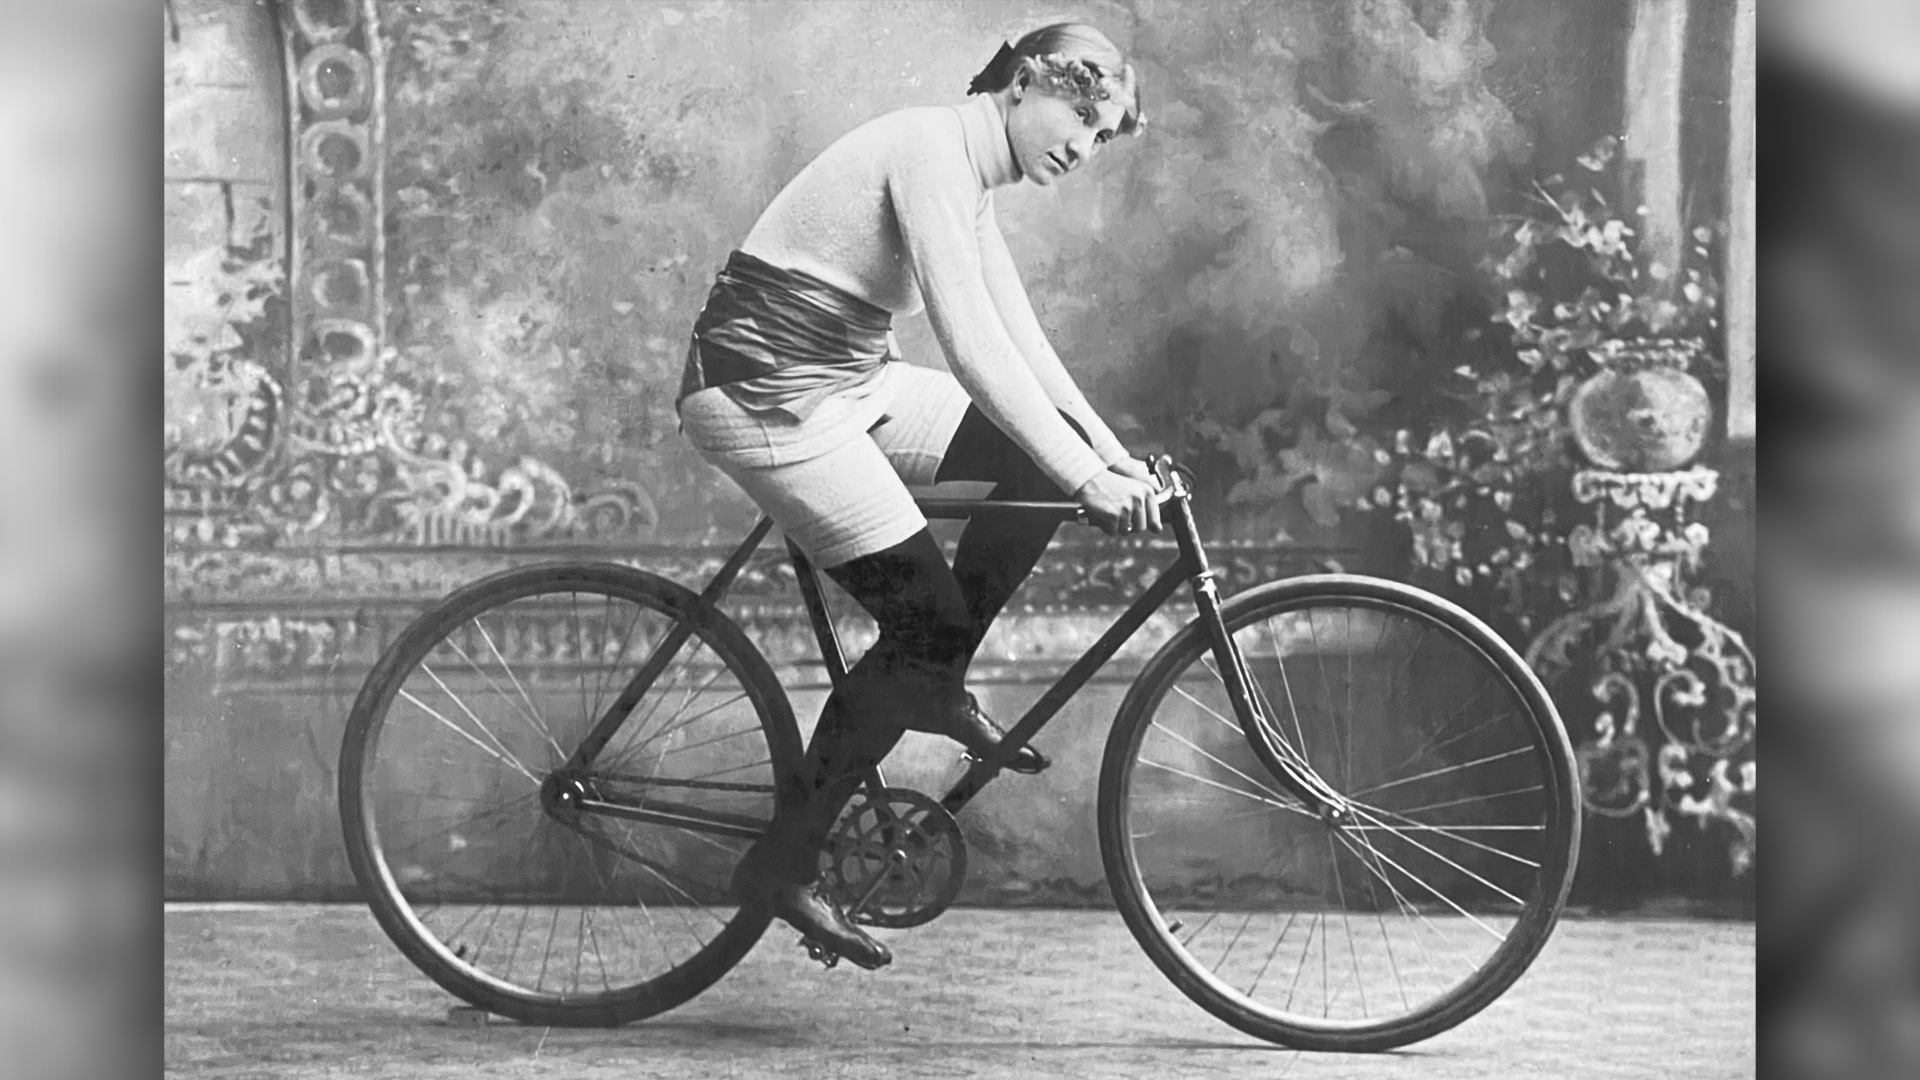 Racing cyclist Tillie Anderson sitting on her bike. in 1896, the League of American Wheelmen recognized her as the best woman cyclist in the world.